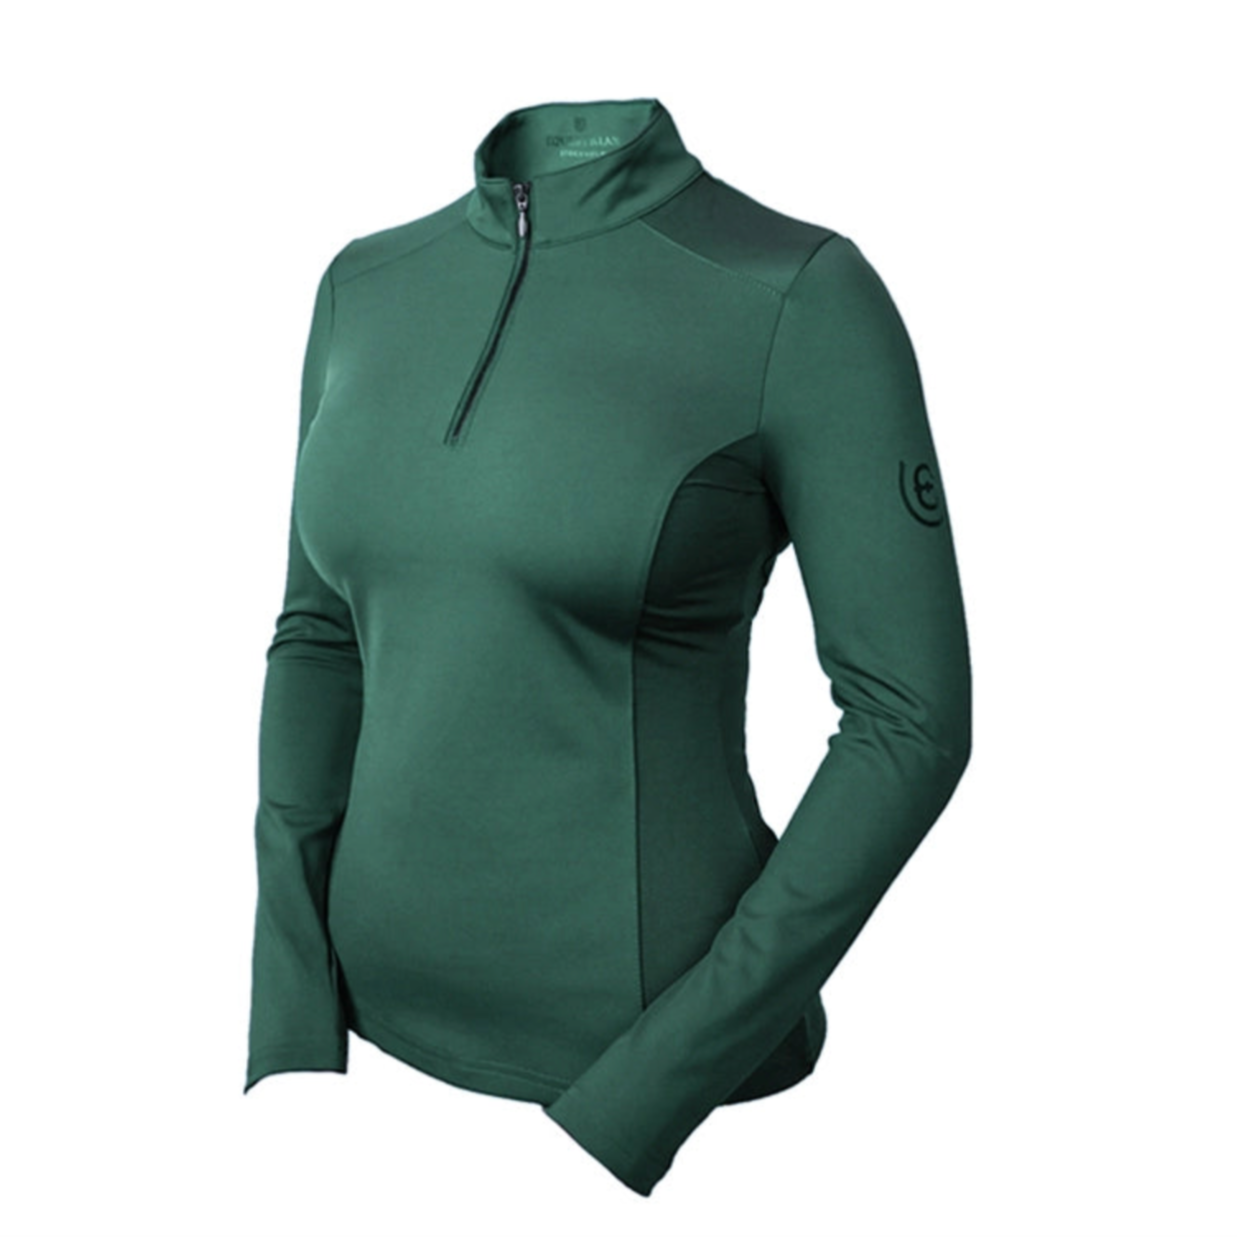 Equestrian Stockholm Sycamore Vision top- 1 xlarge left